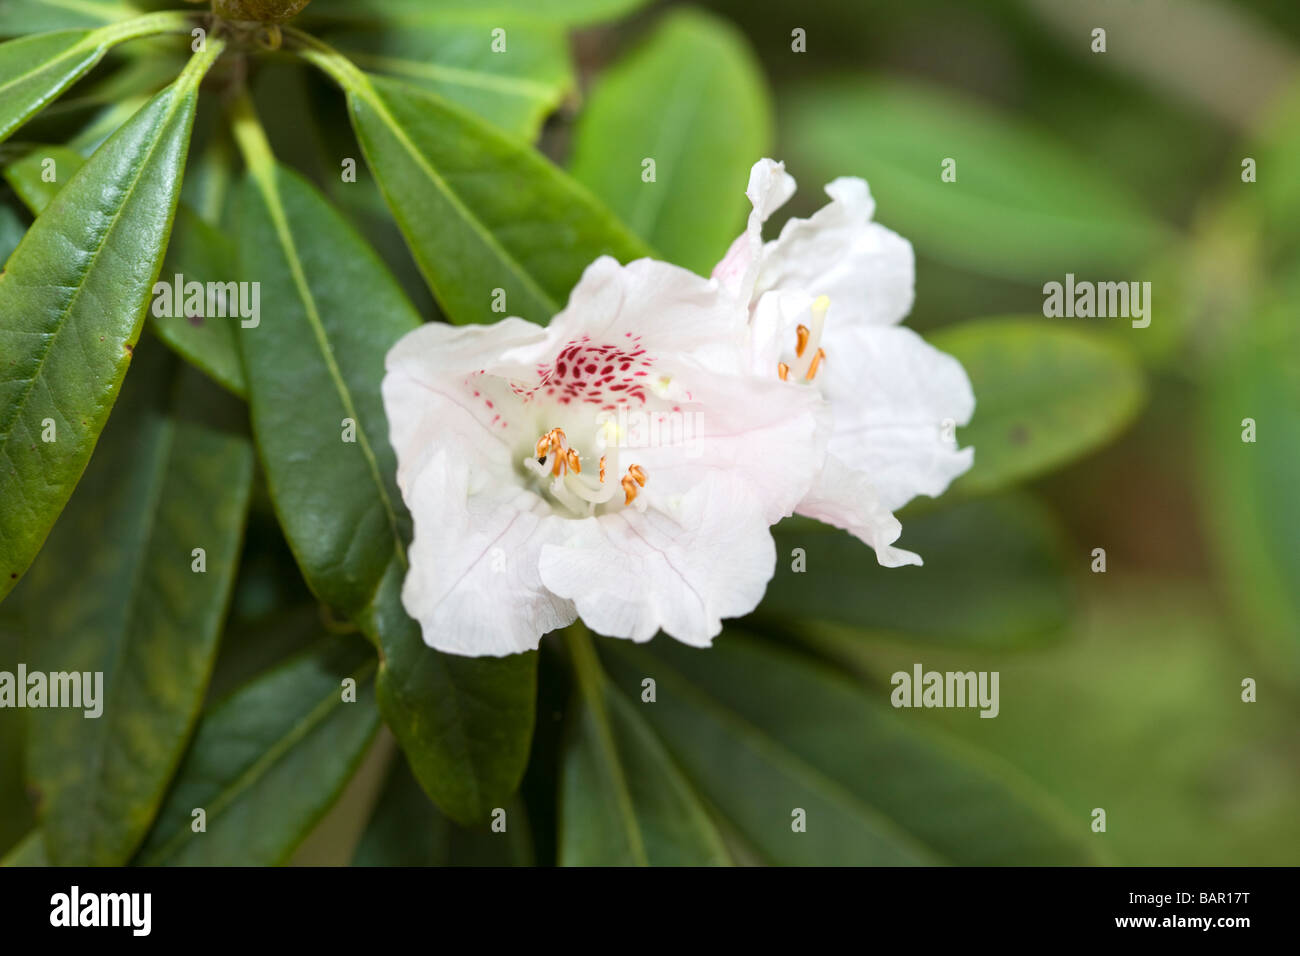 Rhododendron species, Rosettrododendron (Rhododendron hunnewellianum) Stock Photo